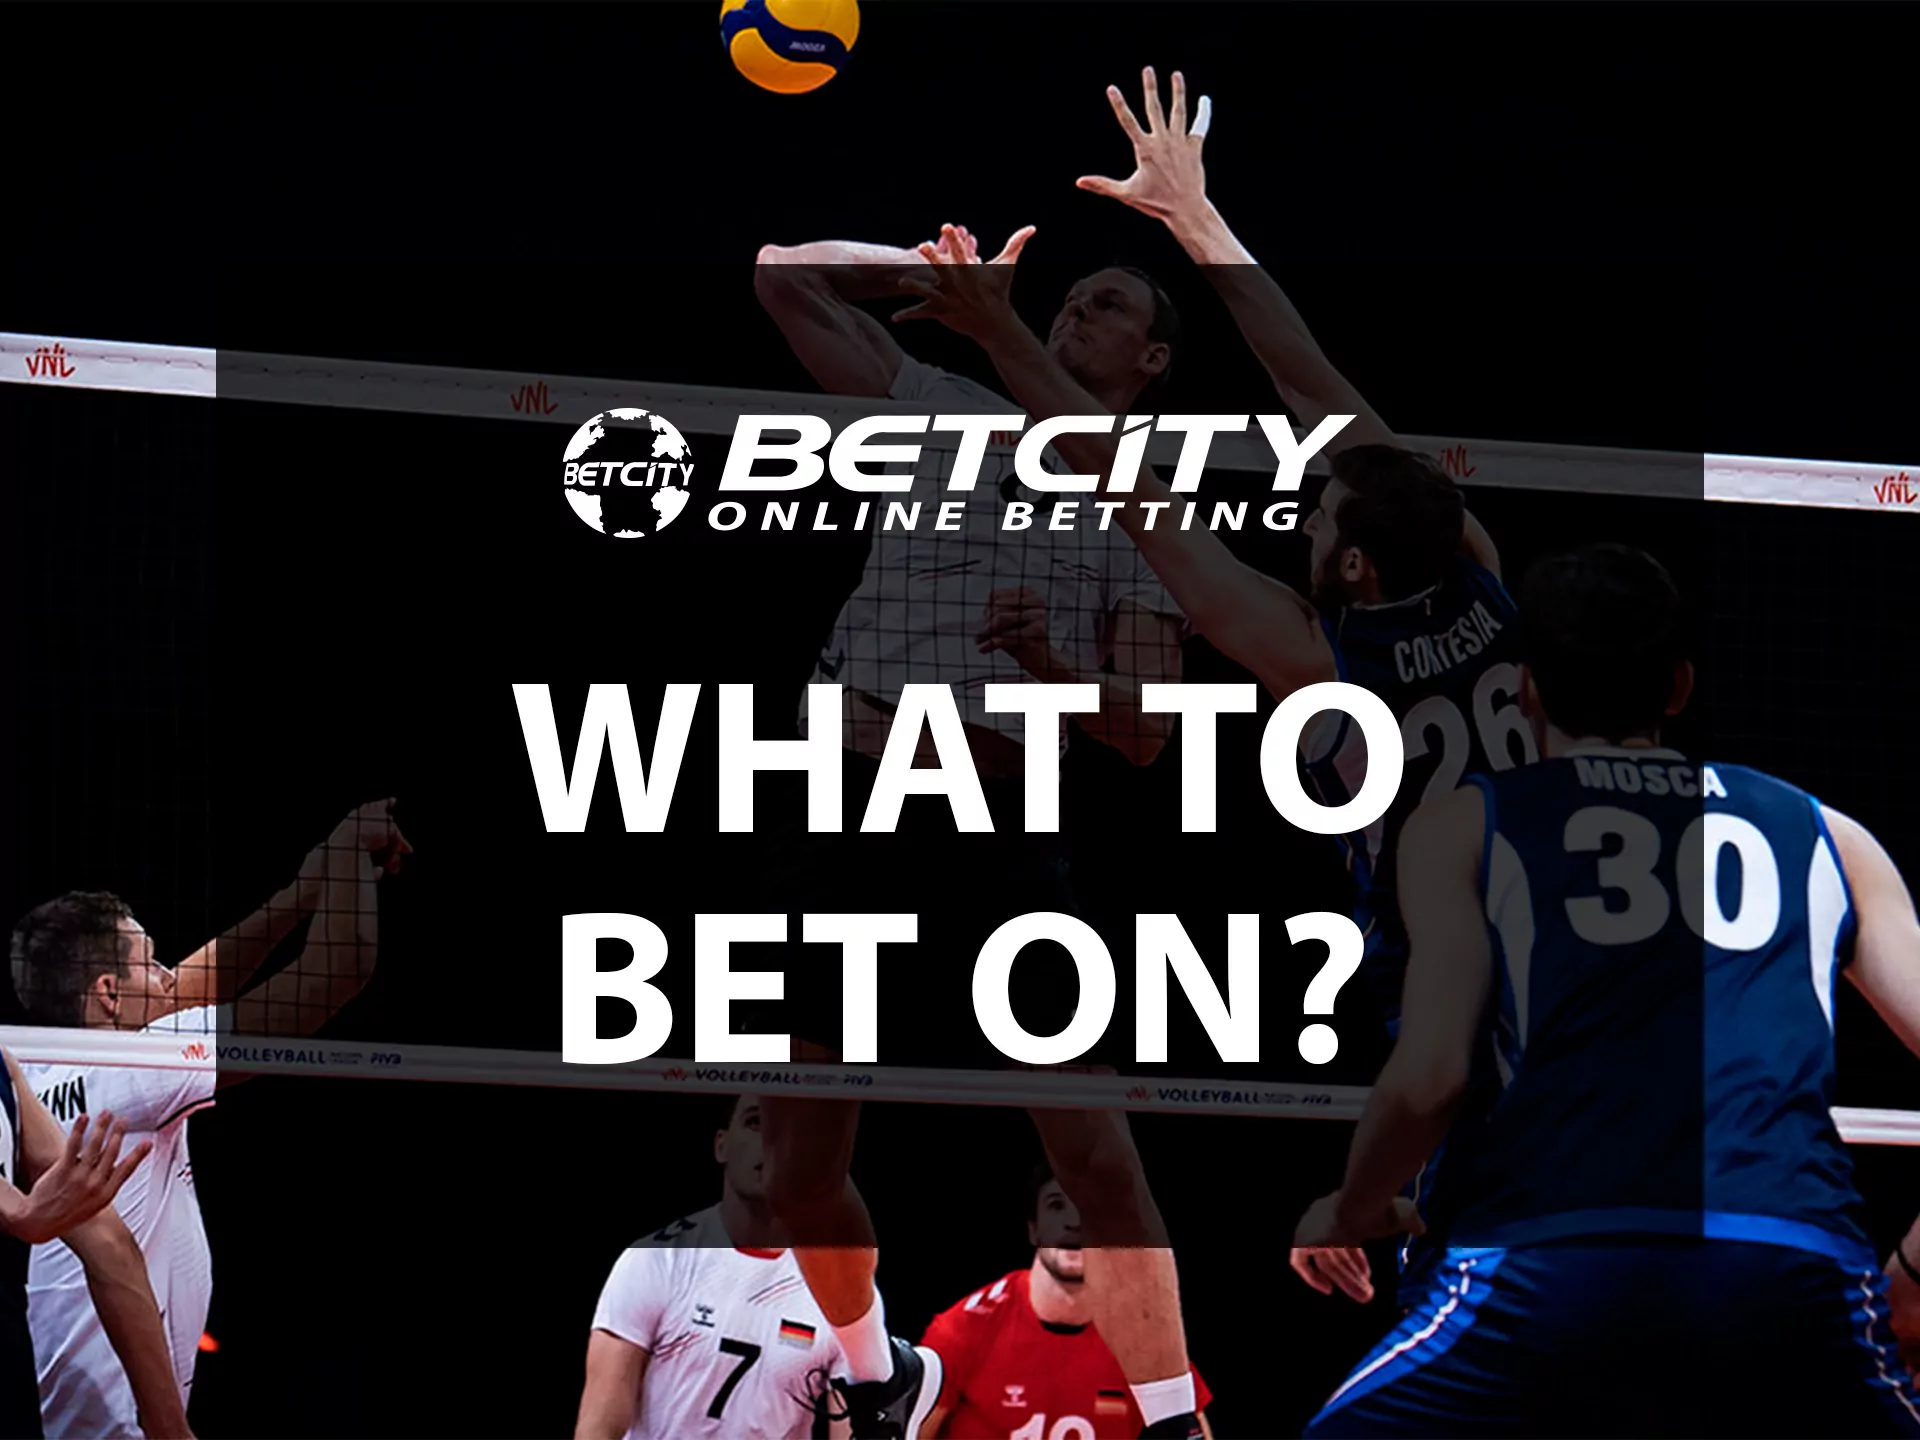 You can bet on different volleyball leagues at Betcity.